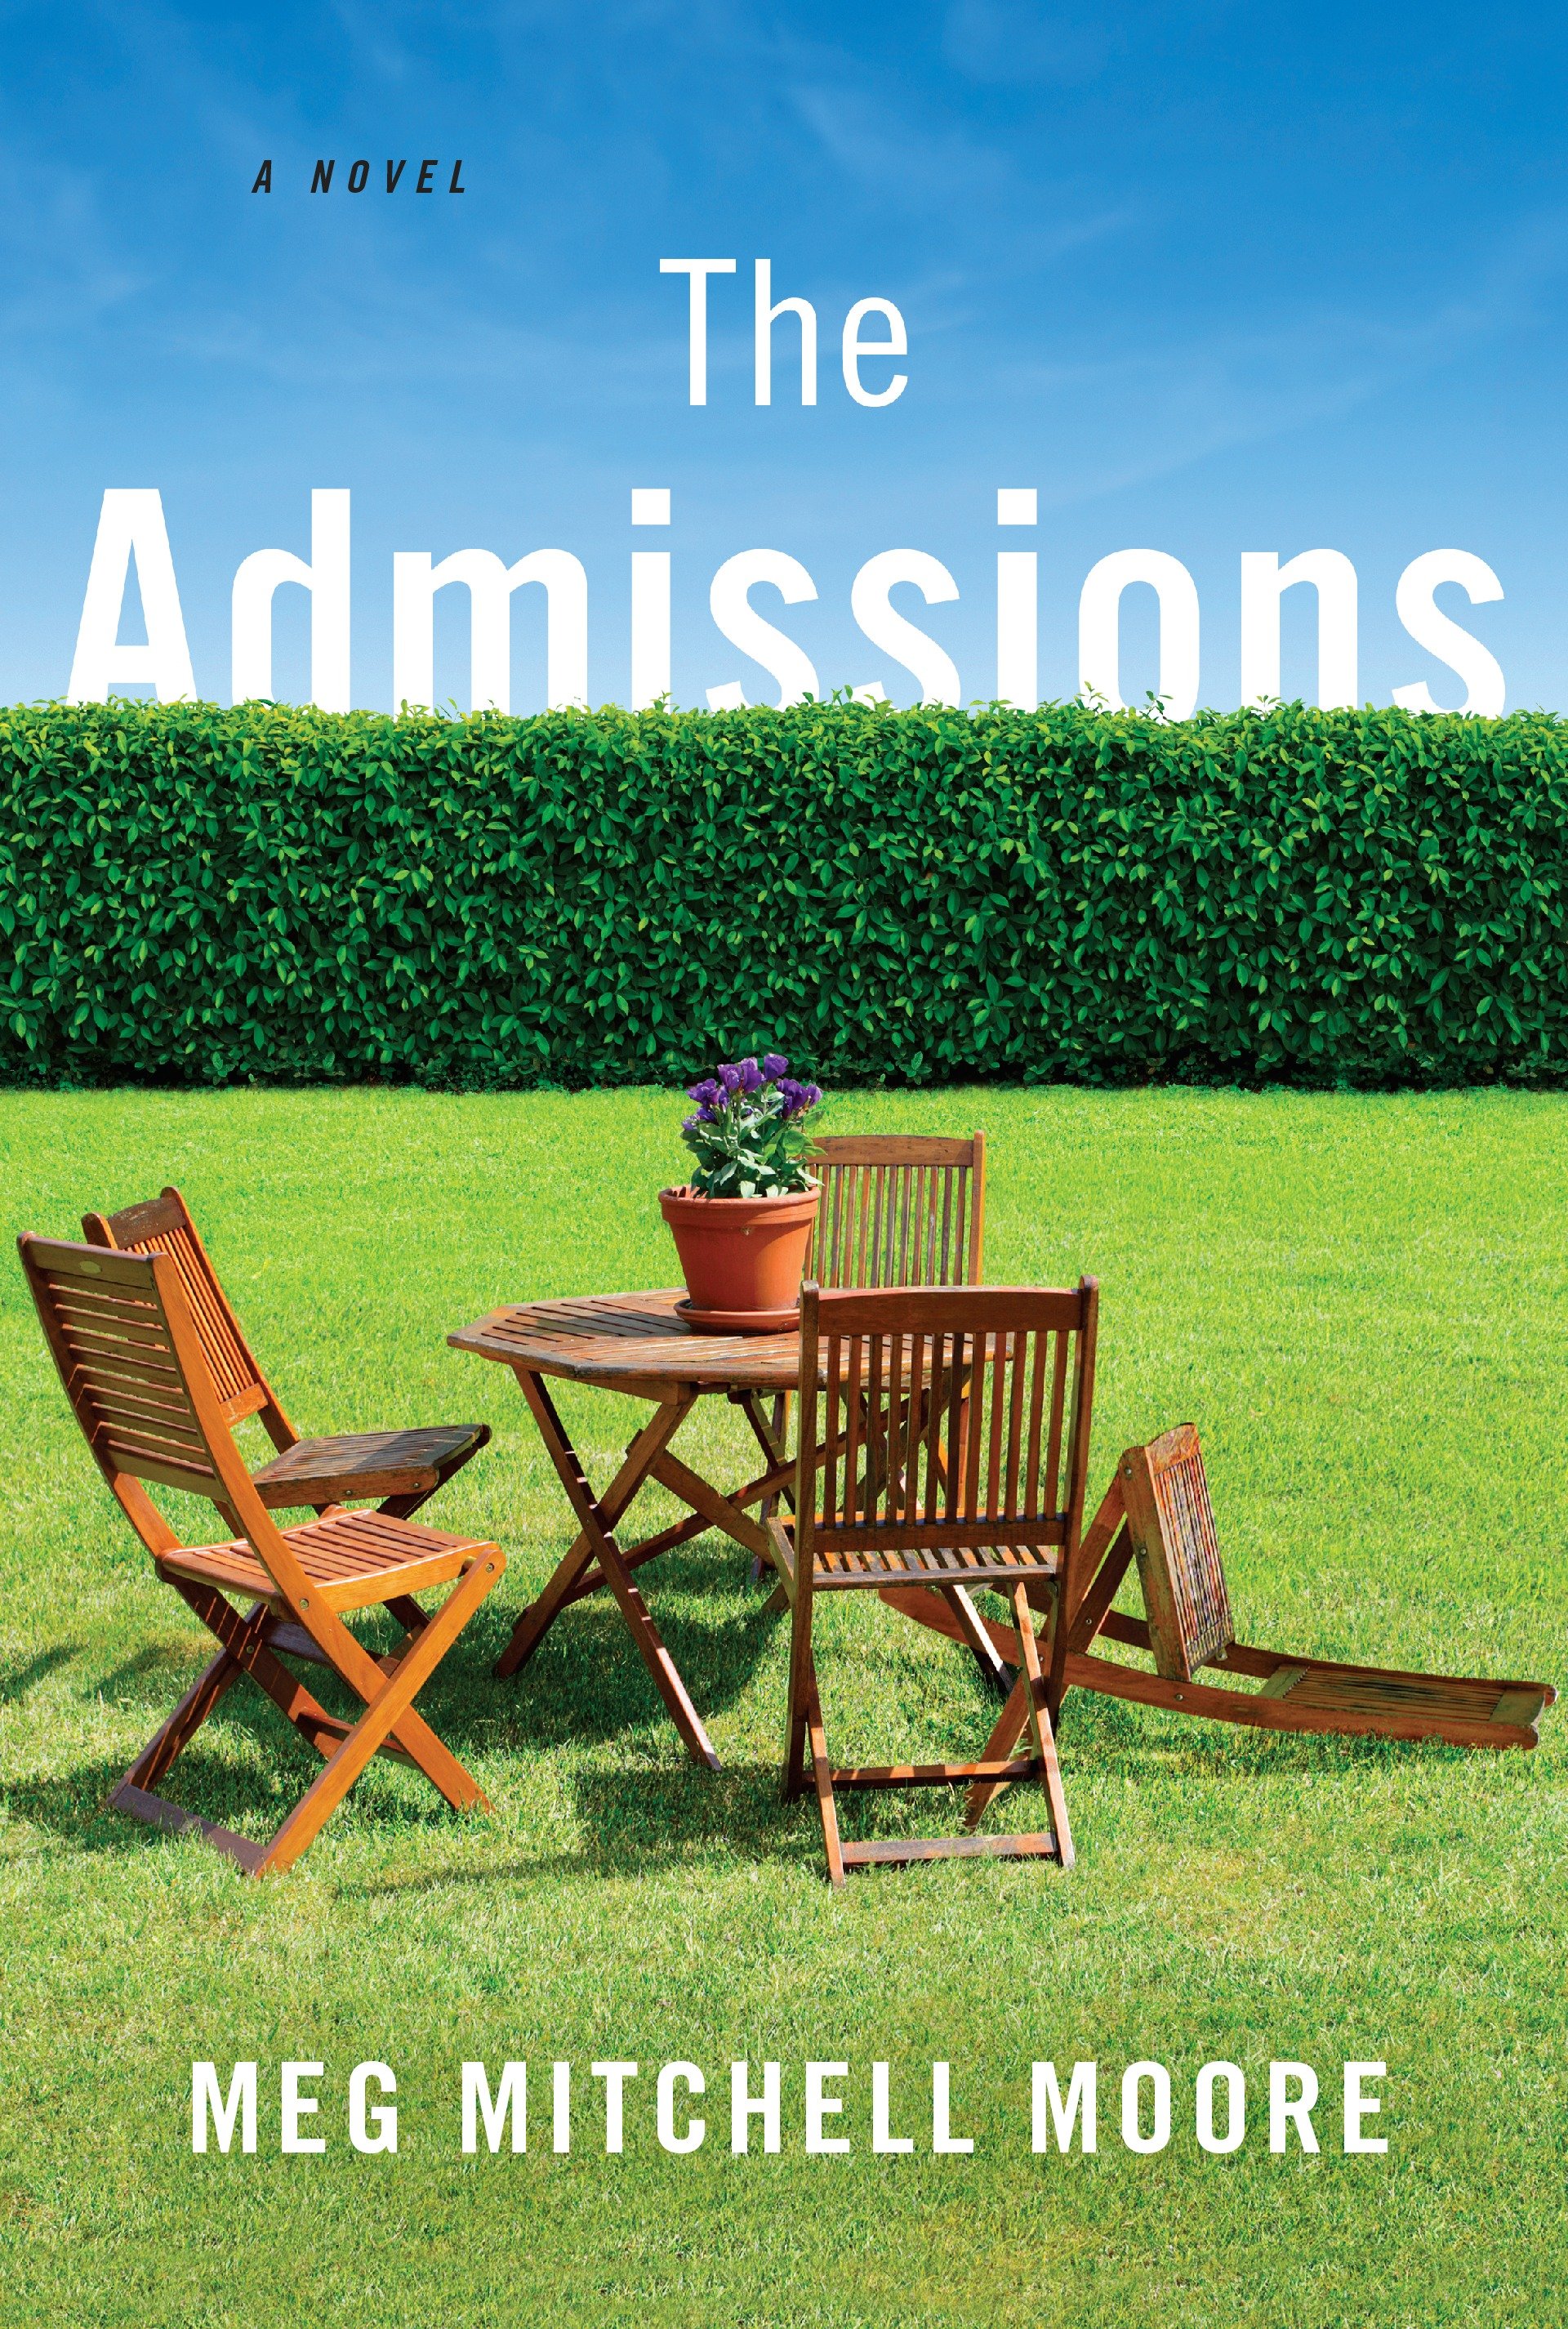 The admissions cover image